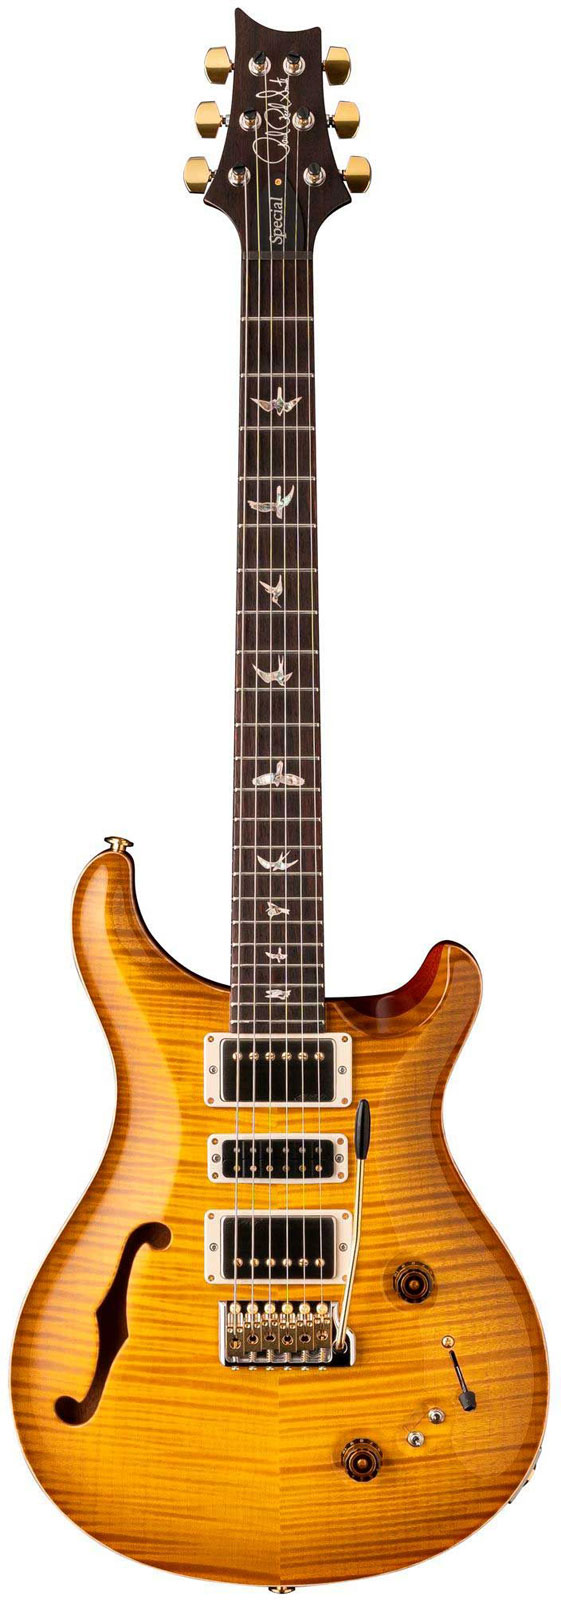 PRS - PAUL REED SMITH SPECIAL SEMIHOLLOW MCCARTY SUNBURST